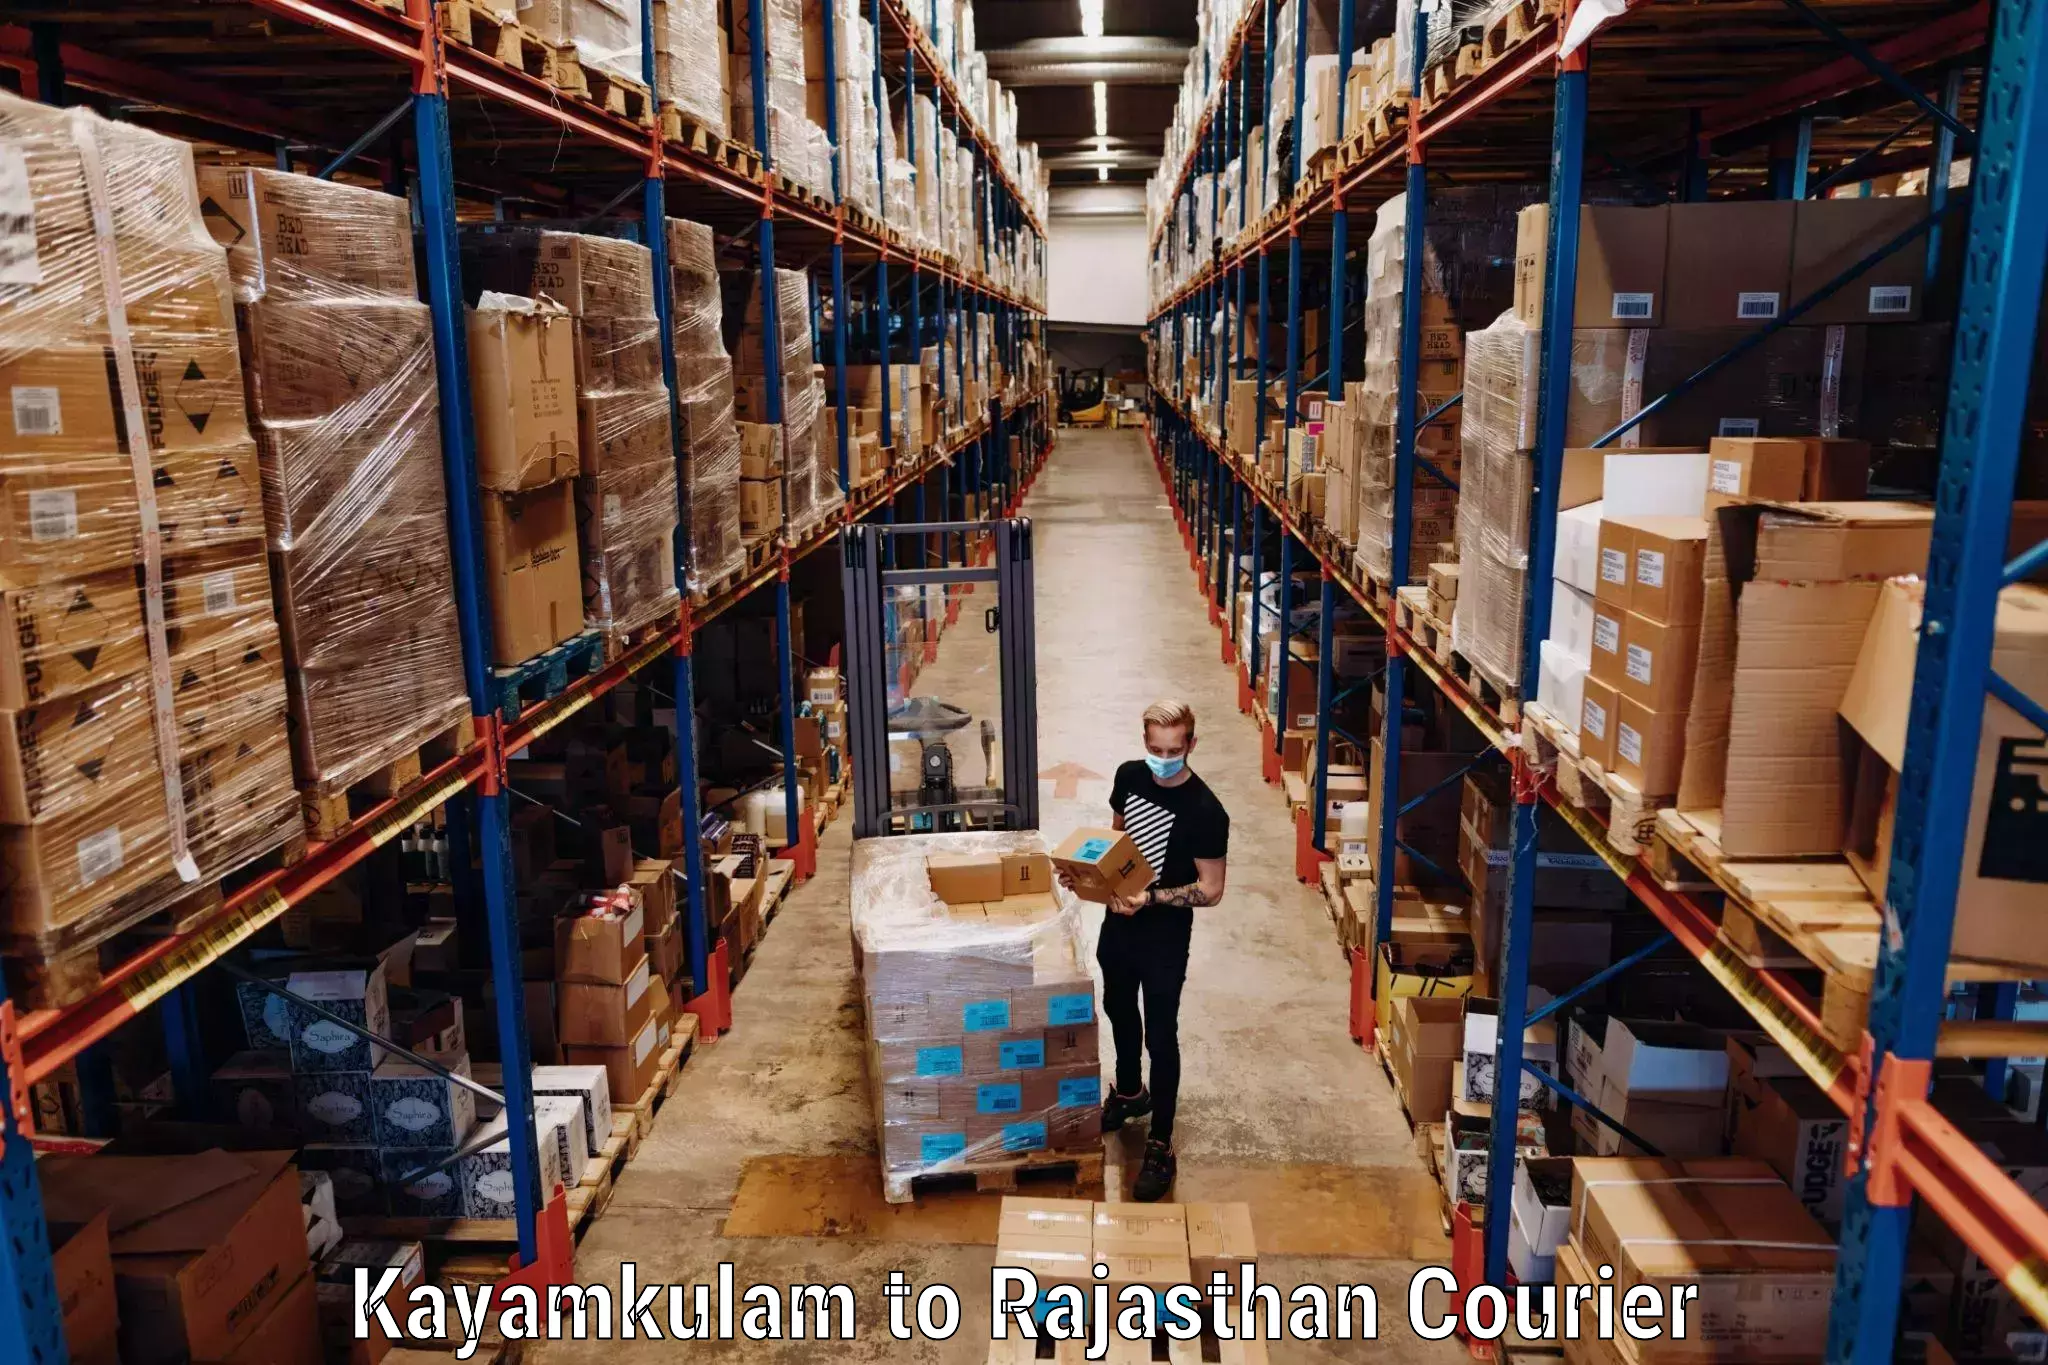 Luggage shipping specialists Kayamkulam to Weir